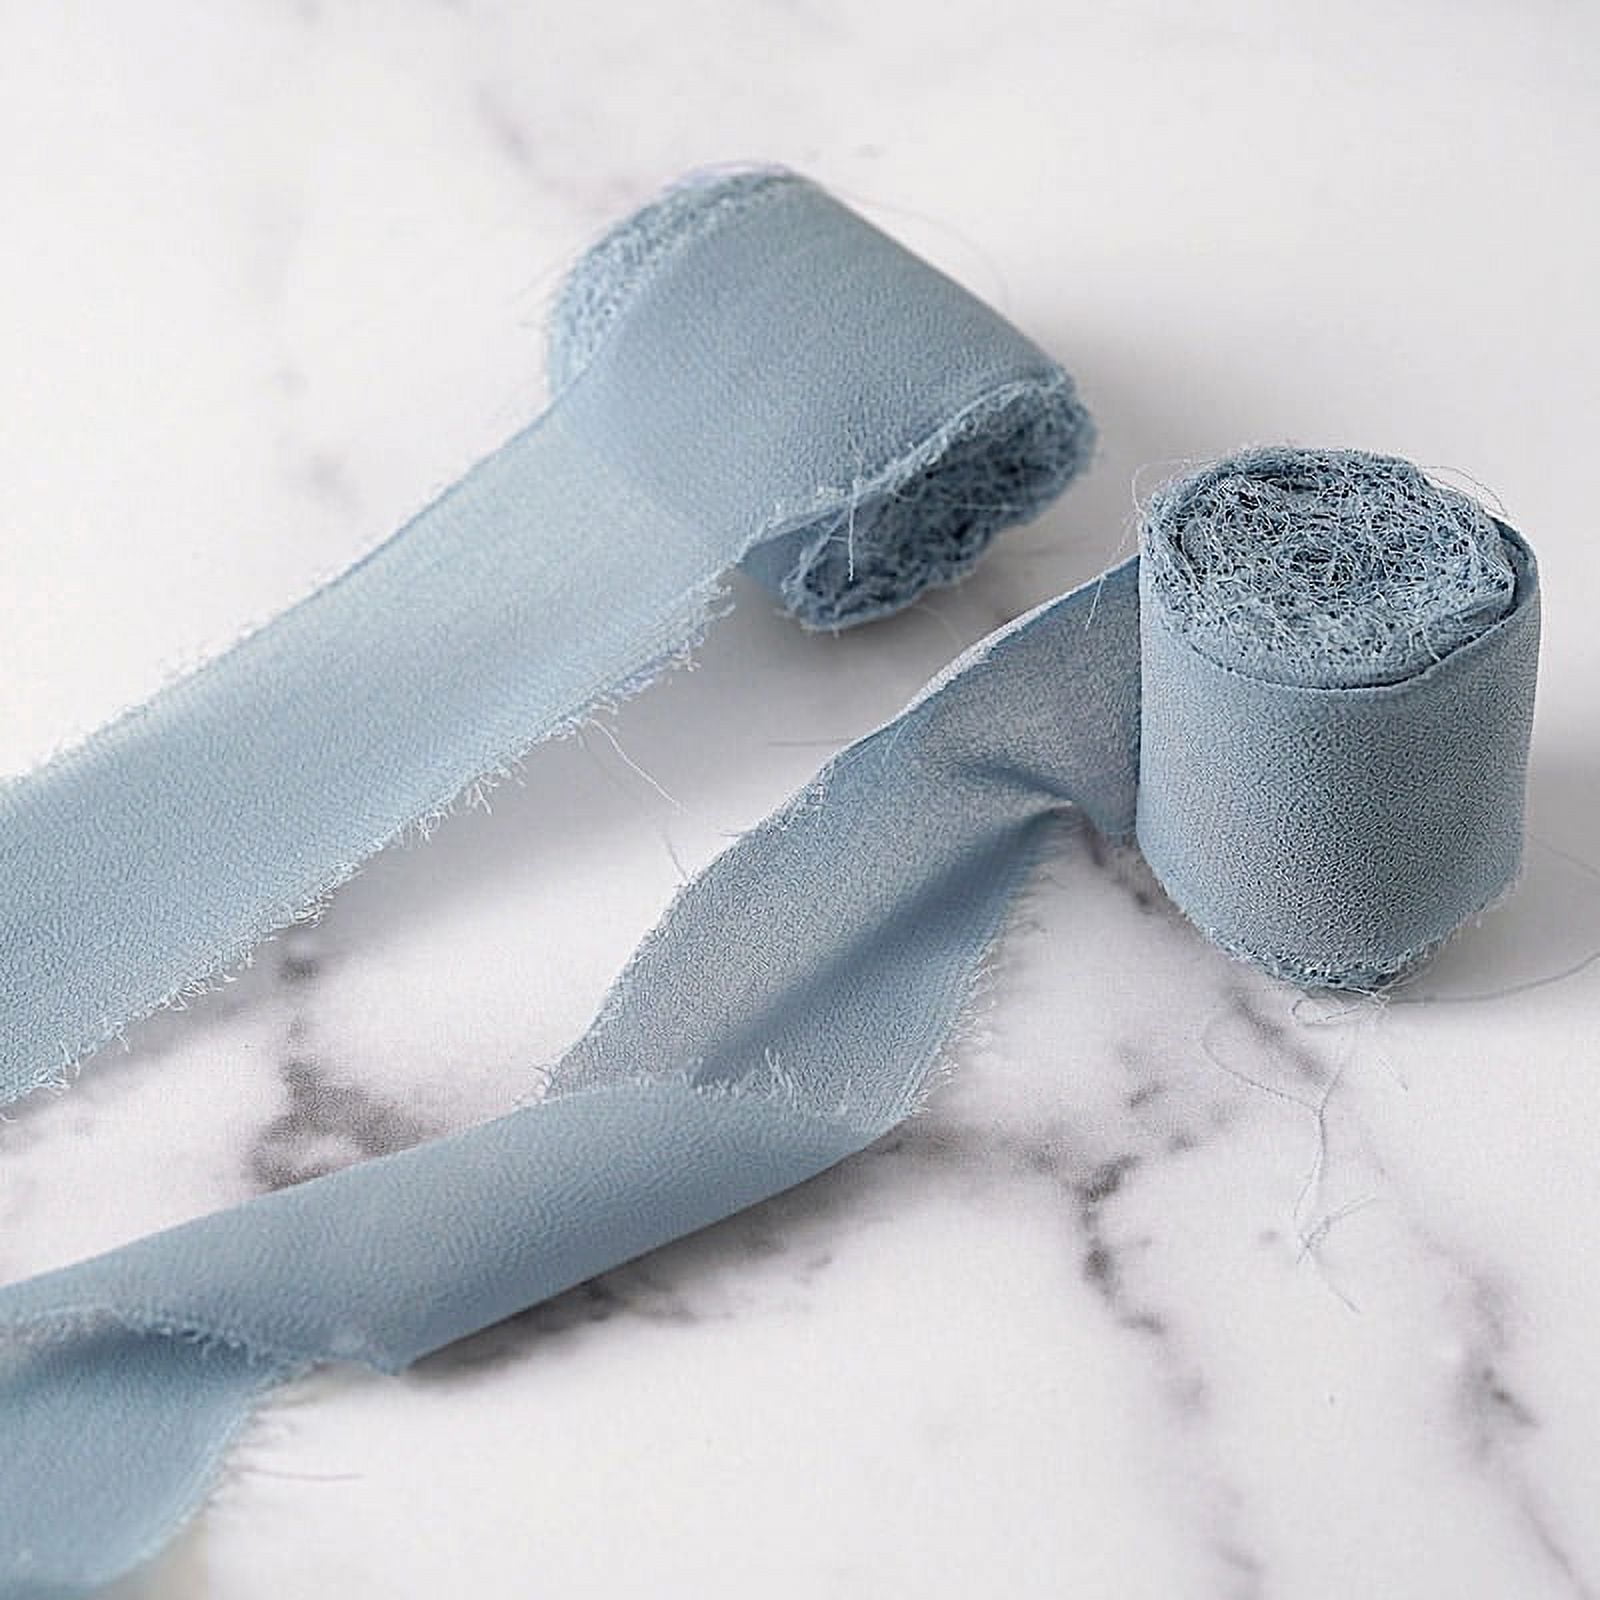 Wholesale blue chiffon ribbon For Gifts, Crafts, And More